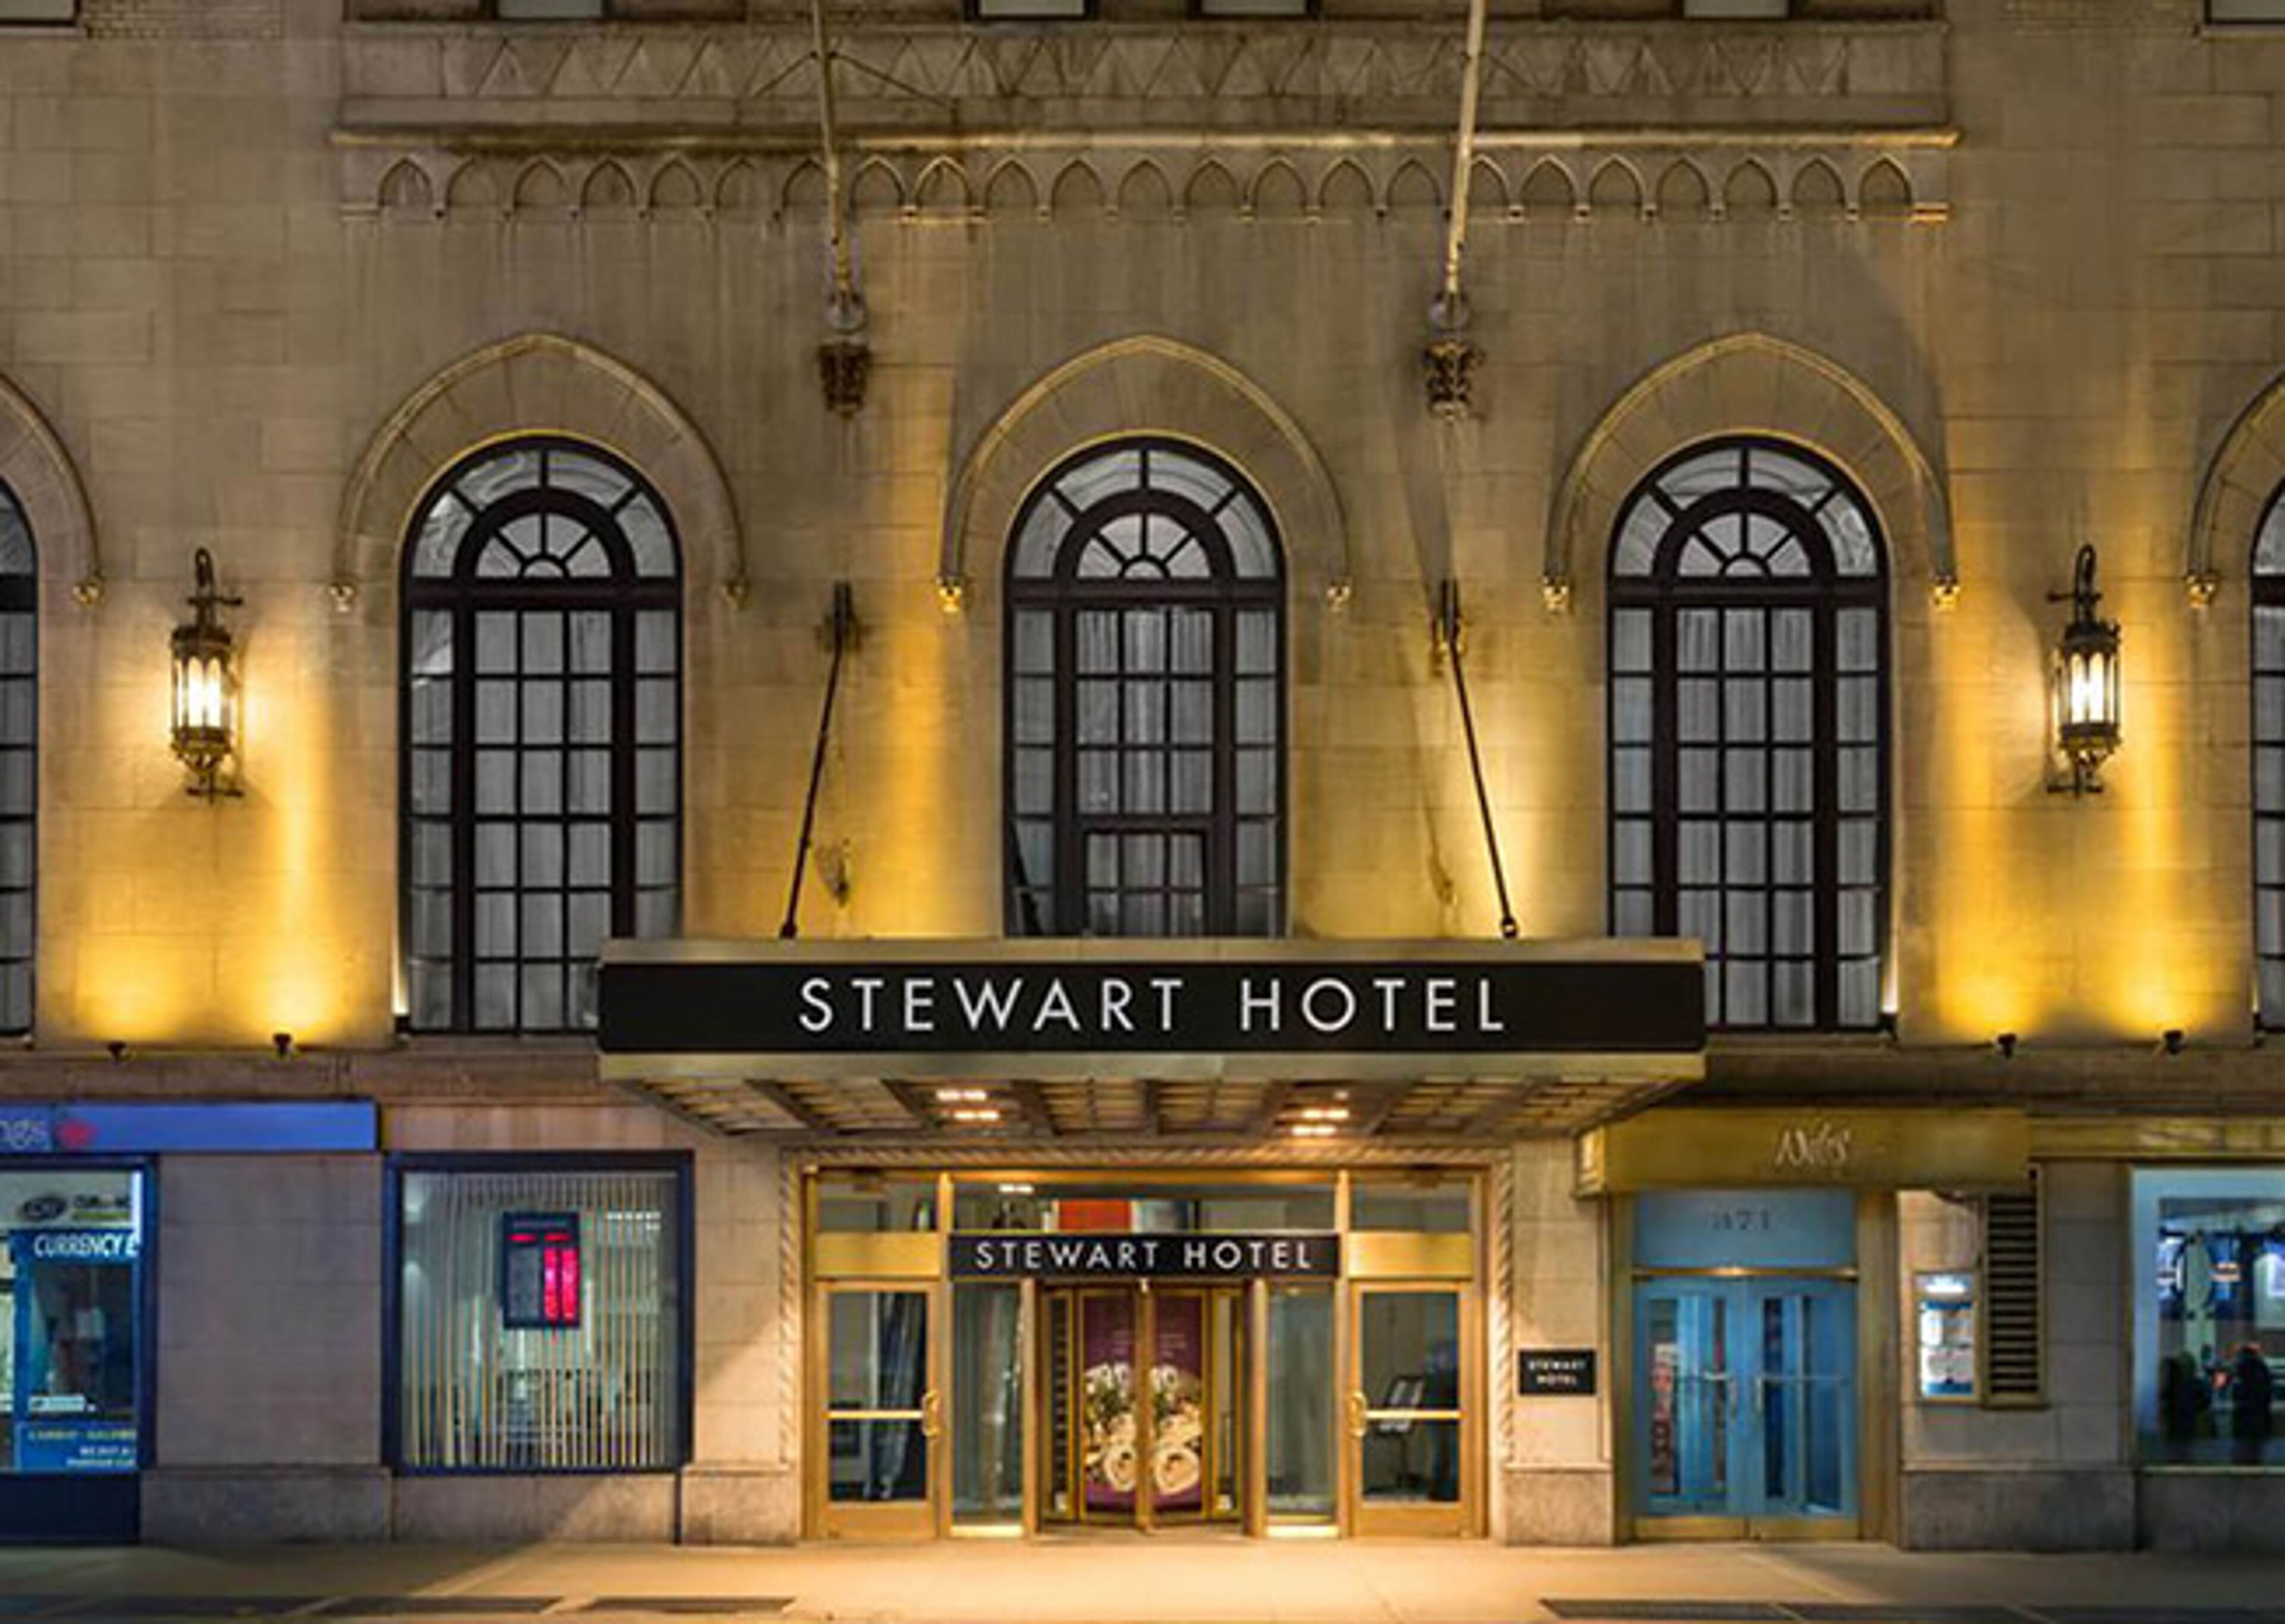 The illuminated entrance of the Stewart Hotel, showcasing its classic architecture with arched windows and a vintage aesthetic at dusk.